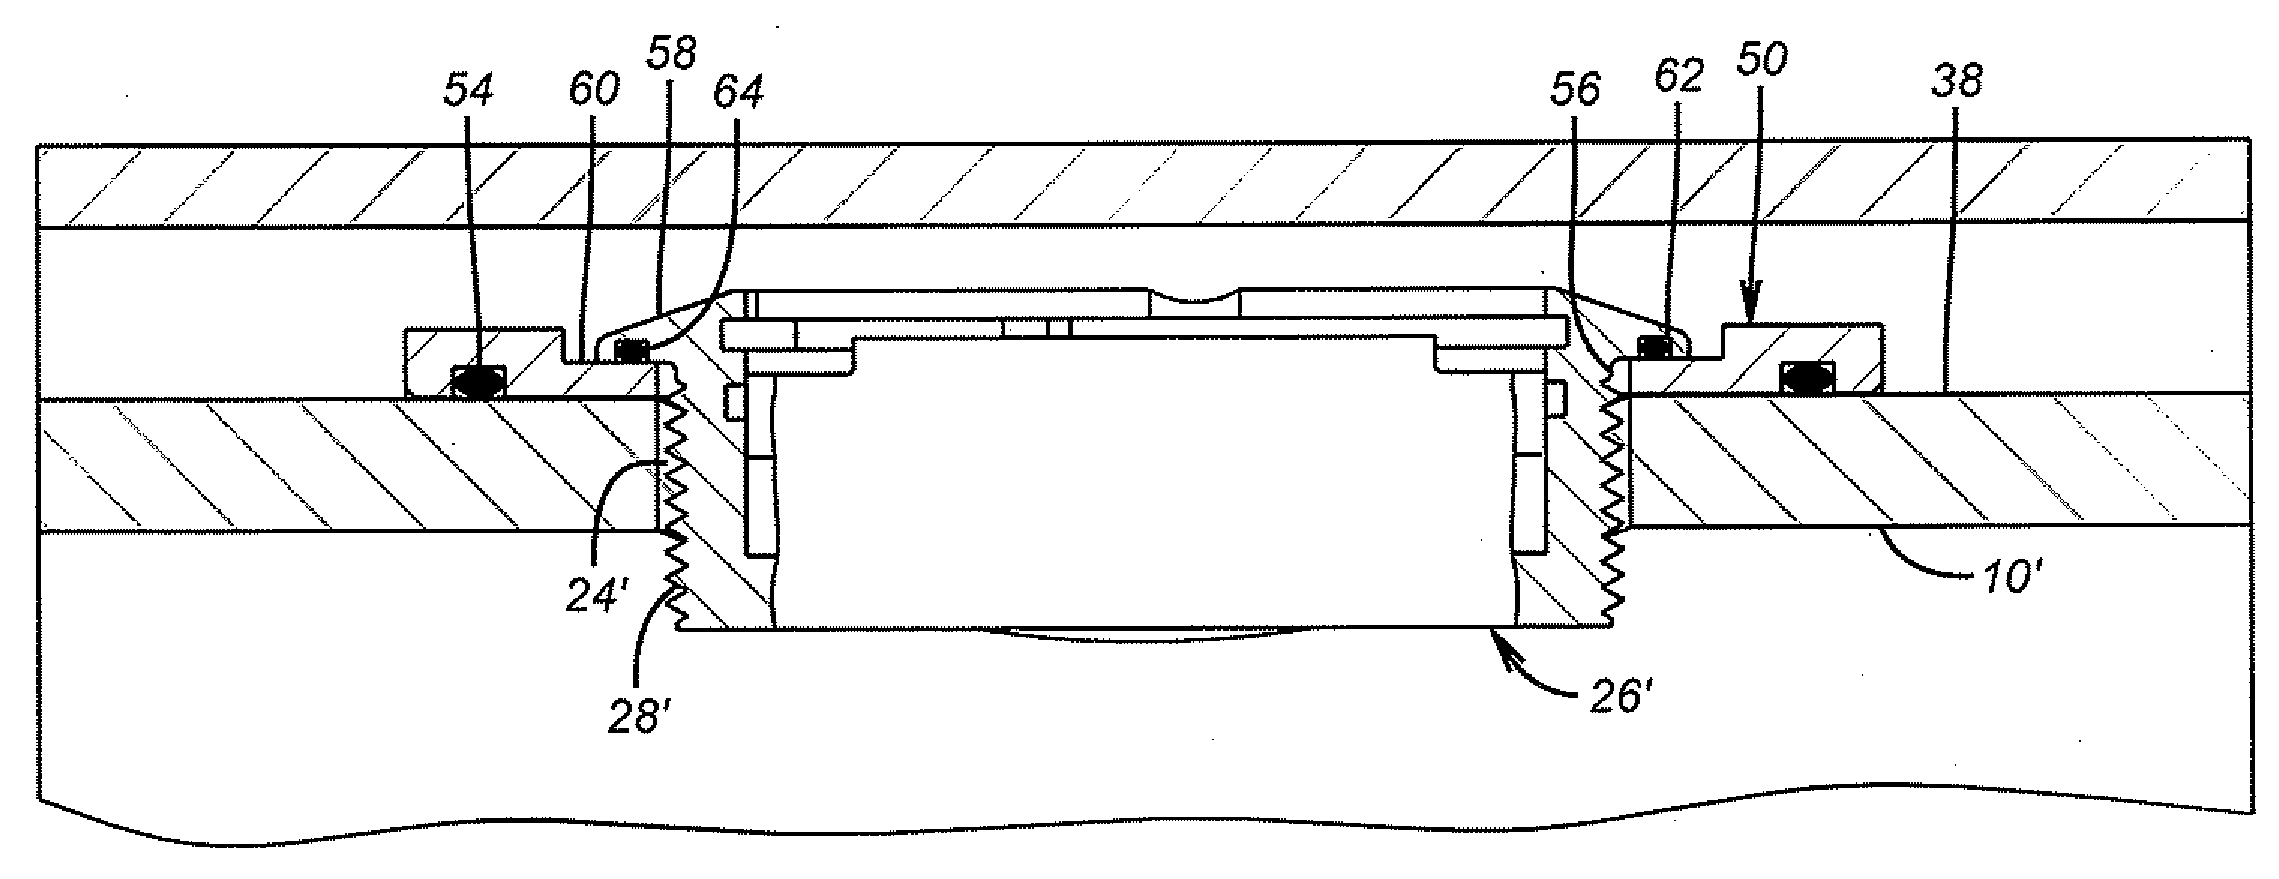 Restrictor Valve Mounting for Downhole Screens